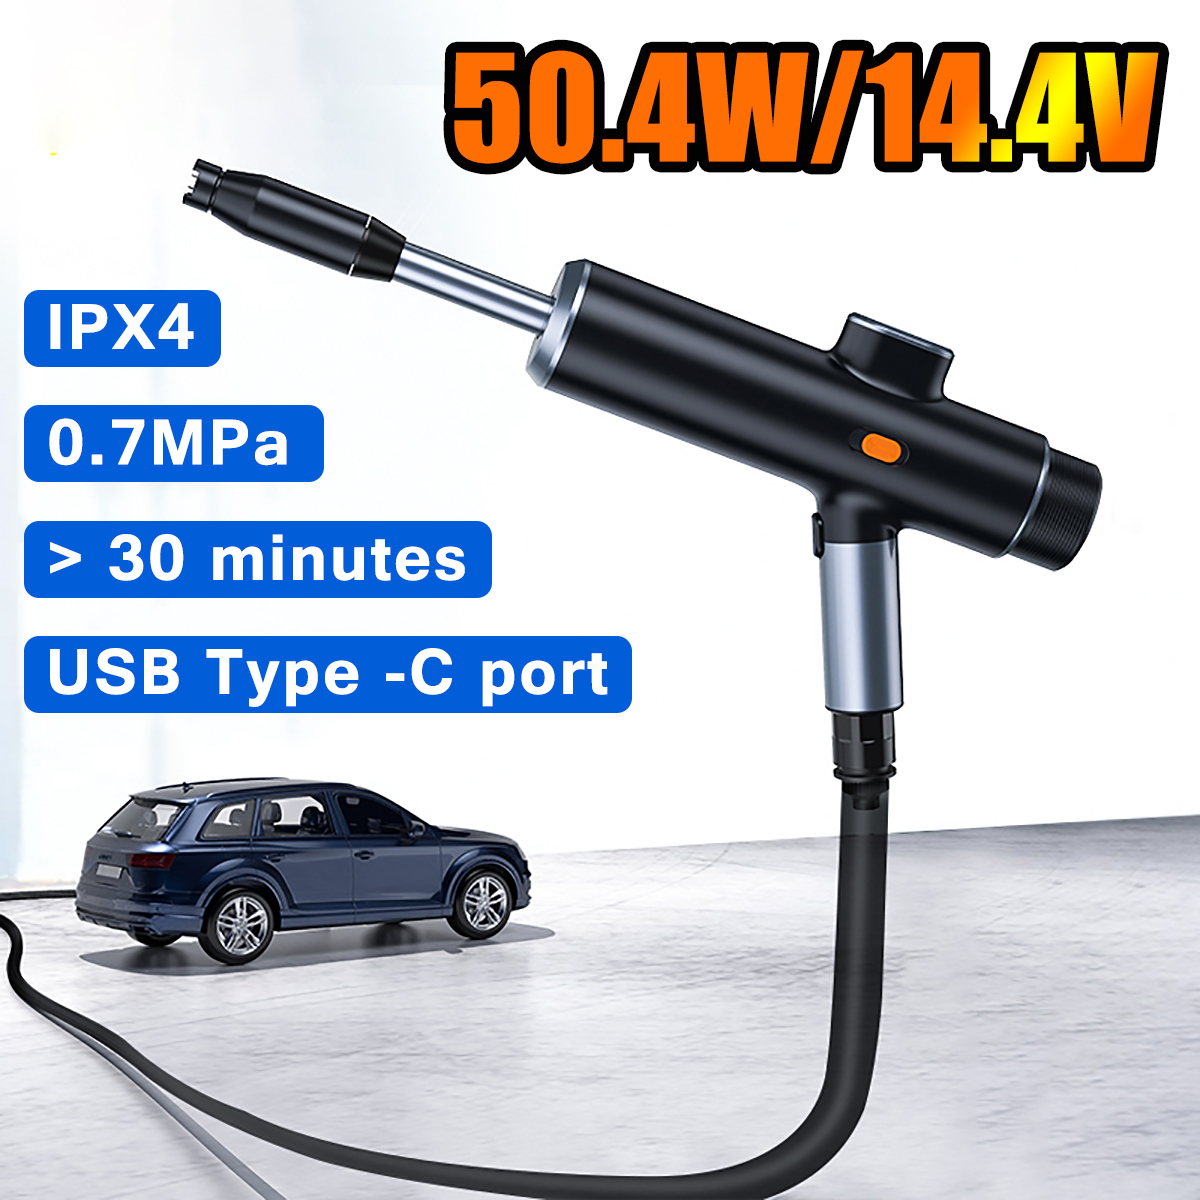 Display-Portable-Cordless-High-Pressure-Washer-Machine-USB-Rechargeable-Electric-Car-Washing-Water-S-1861681-4